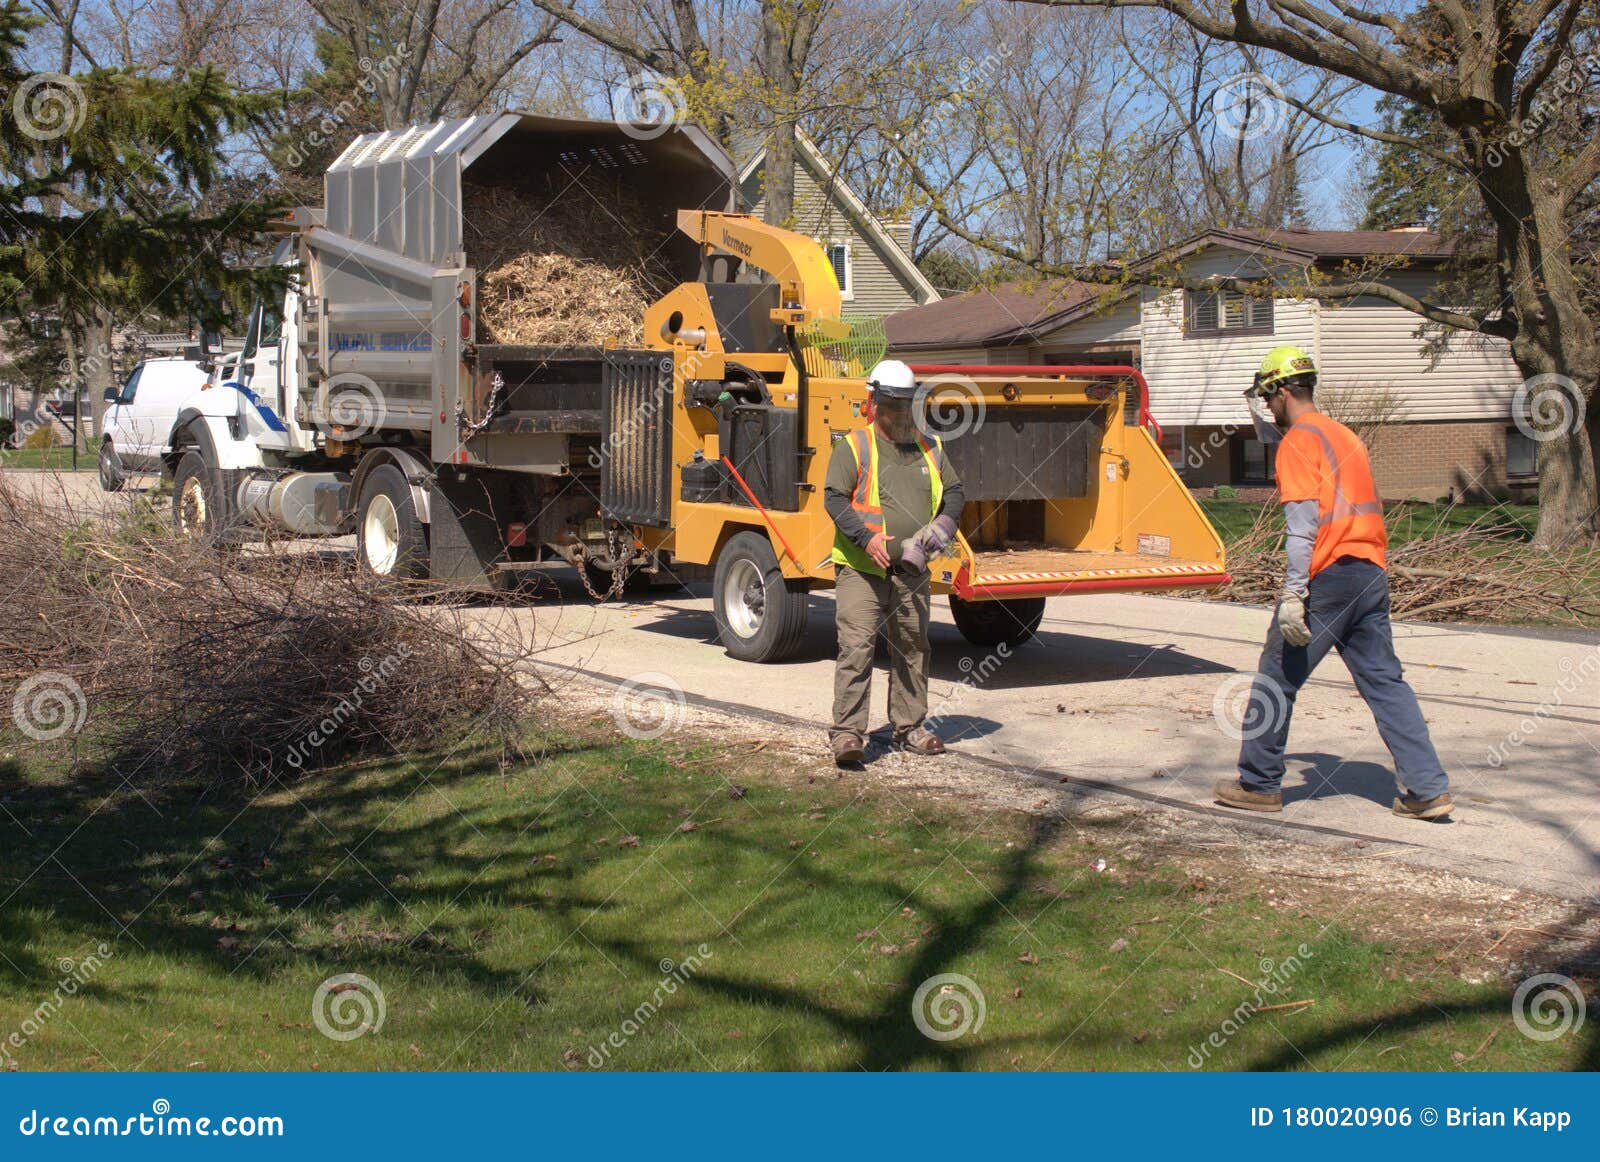 City Workers Use a Wood Chipper To Conduct Brush Pickup, a Service